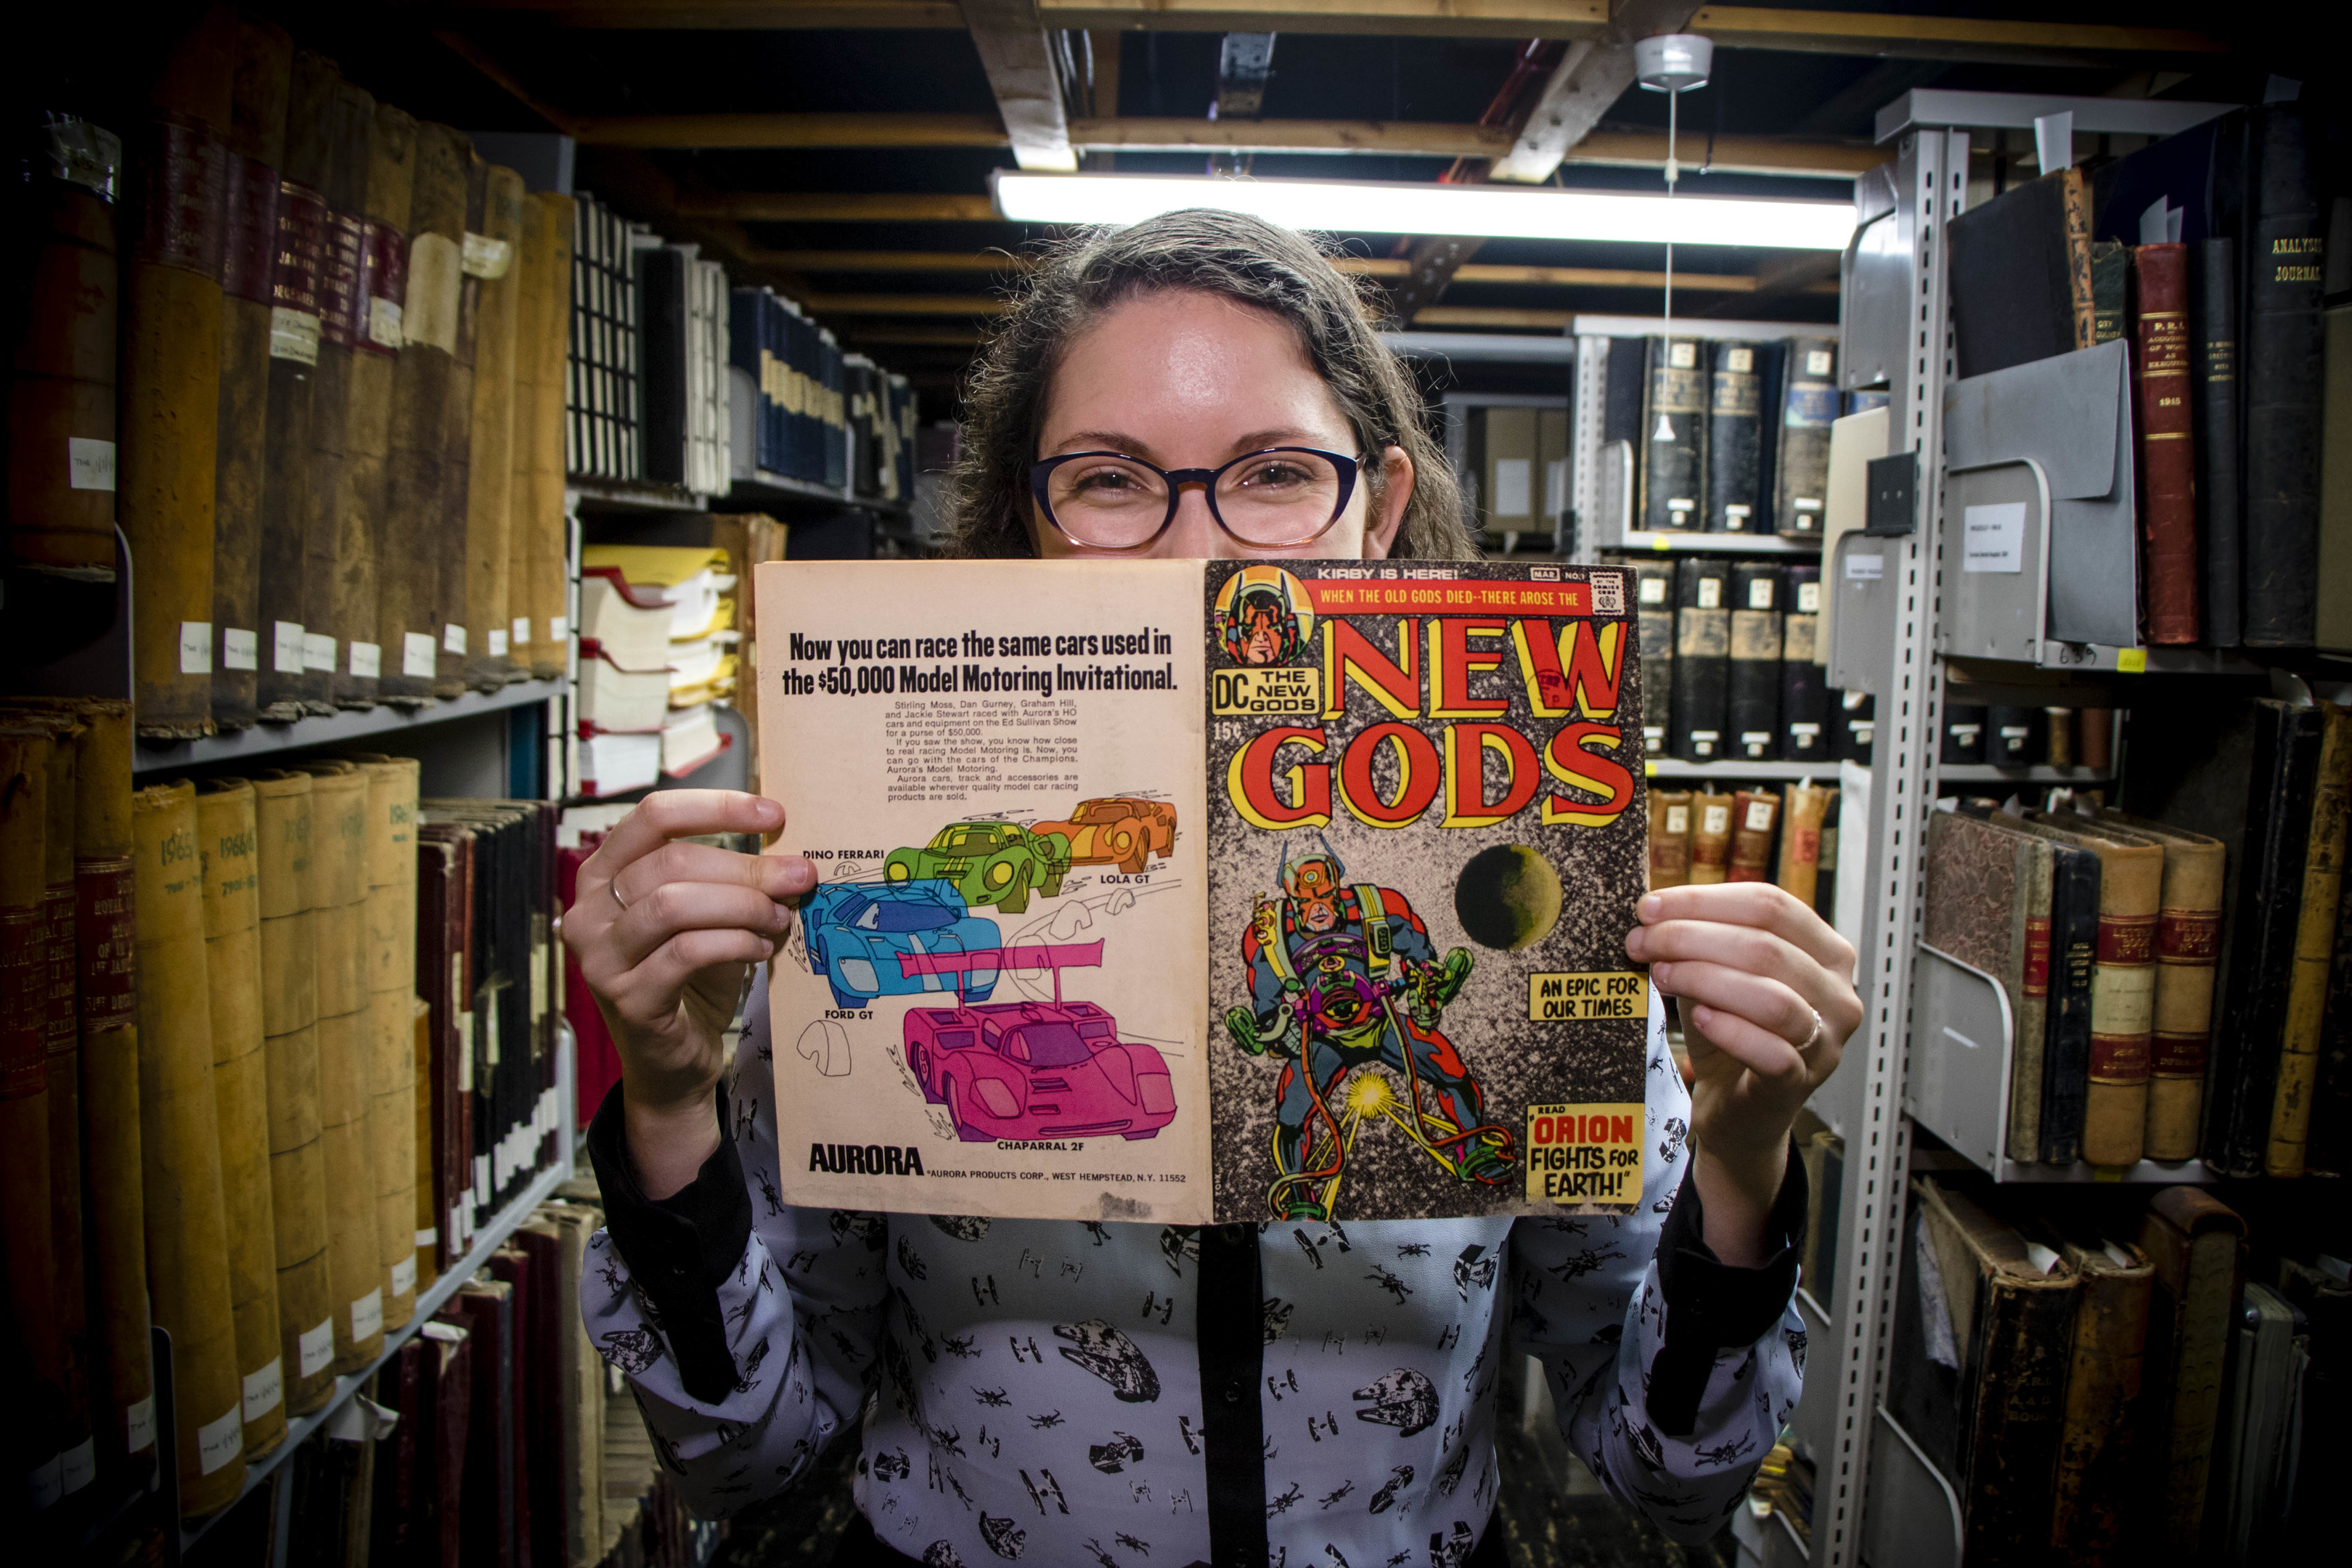 Hailey Austin with a copy of New Gods #1 from 1971.